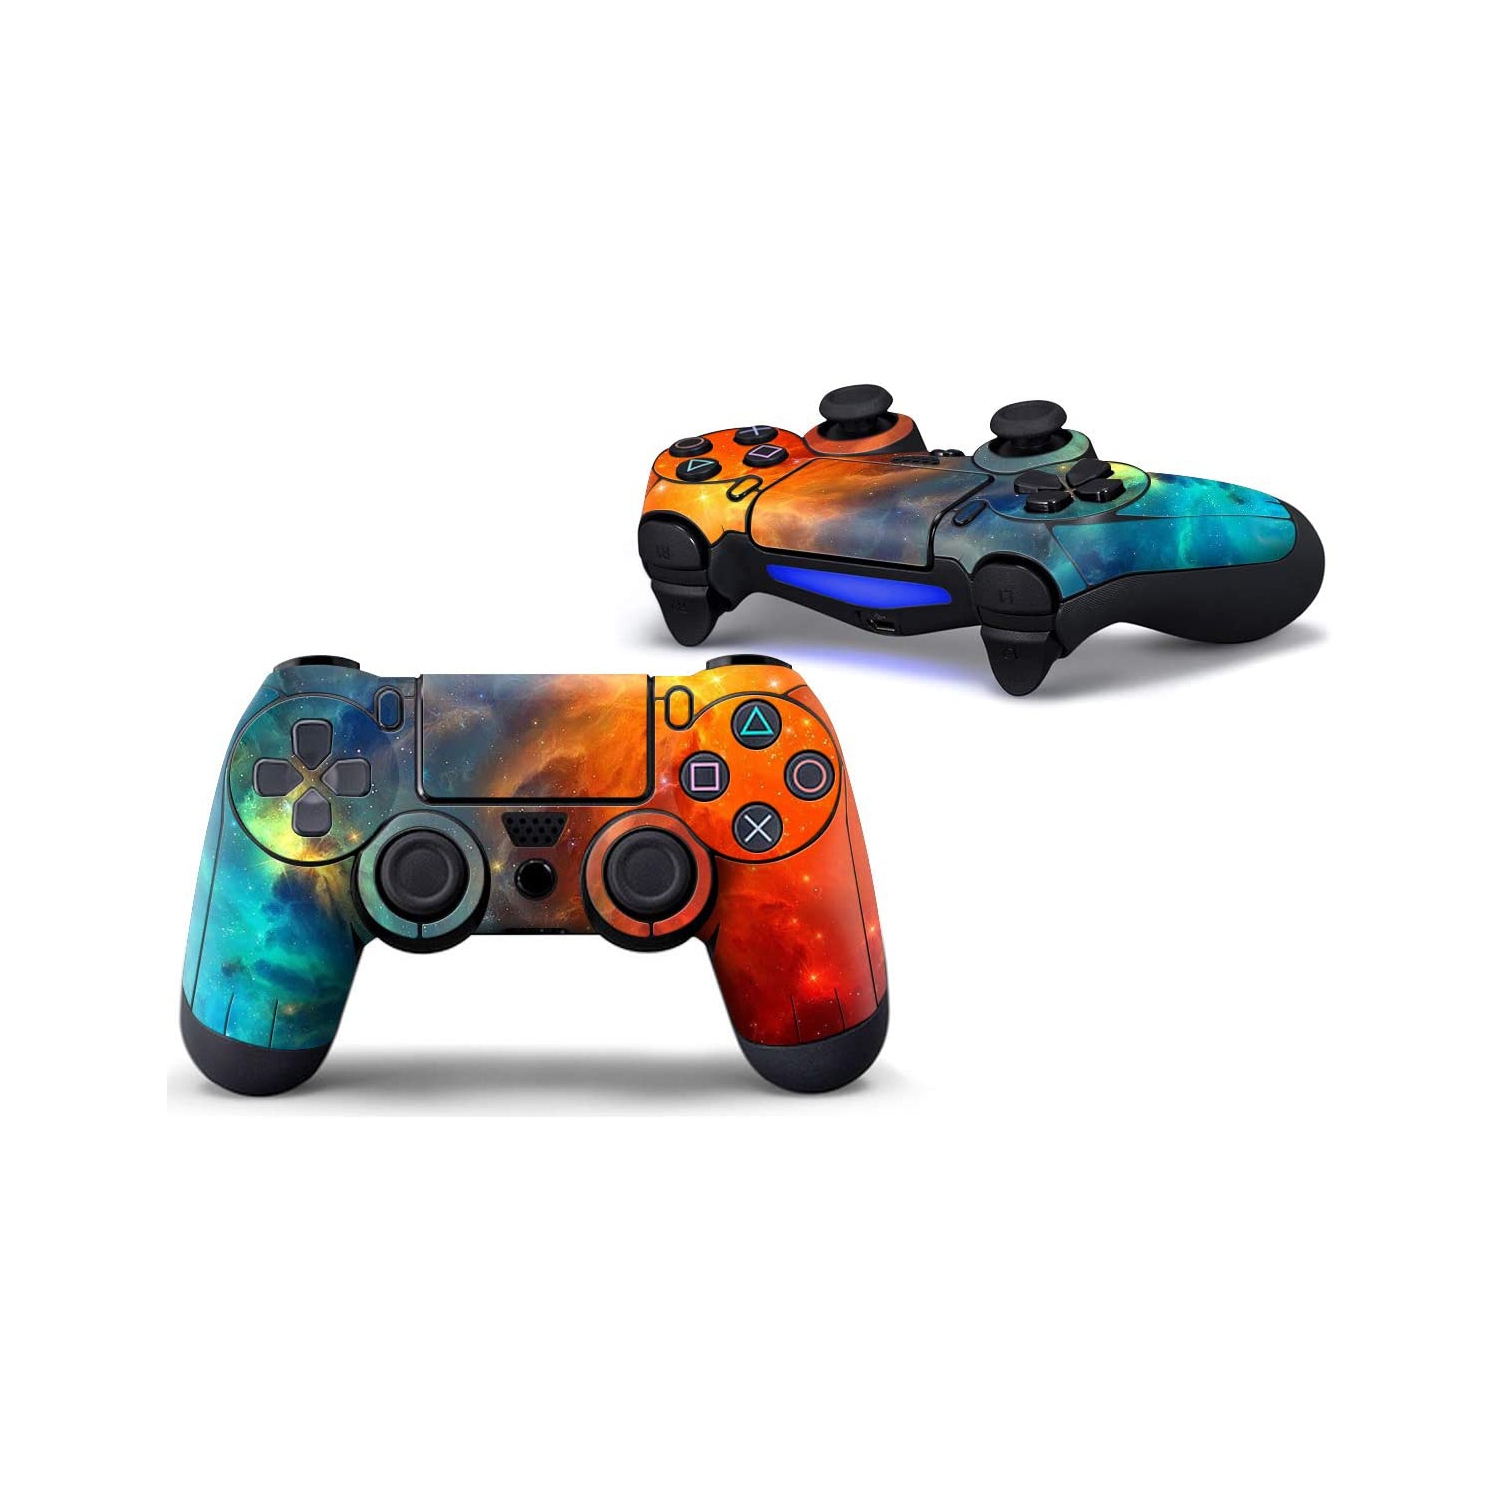 PS4 Controller Skin Cosmic Nebular Sticker Vinly Decal Cover for Sony Playstation 4 DualShock Wireless